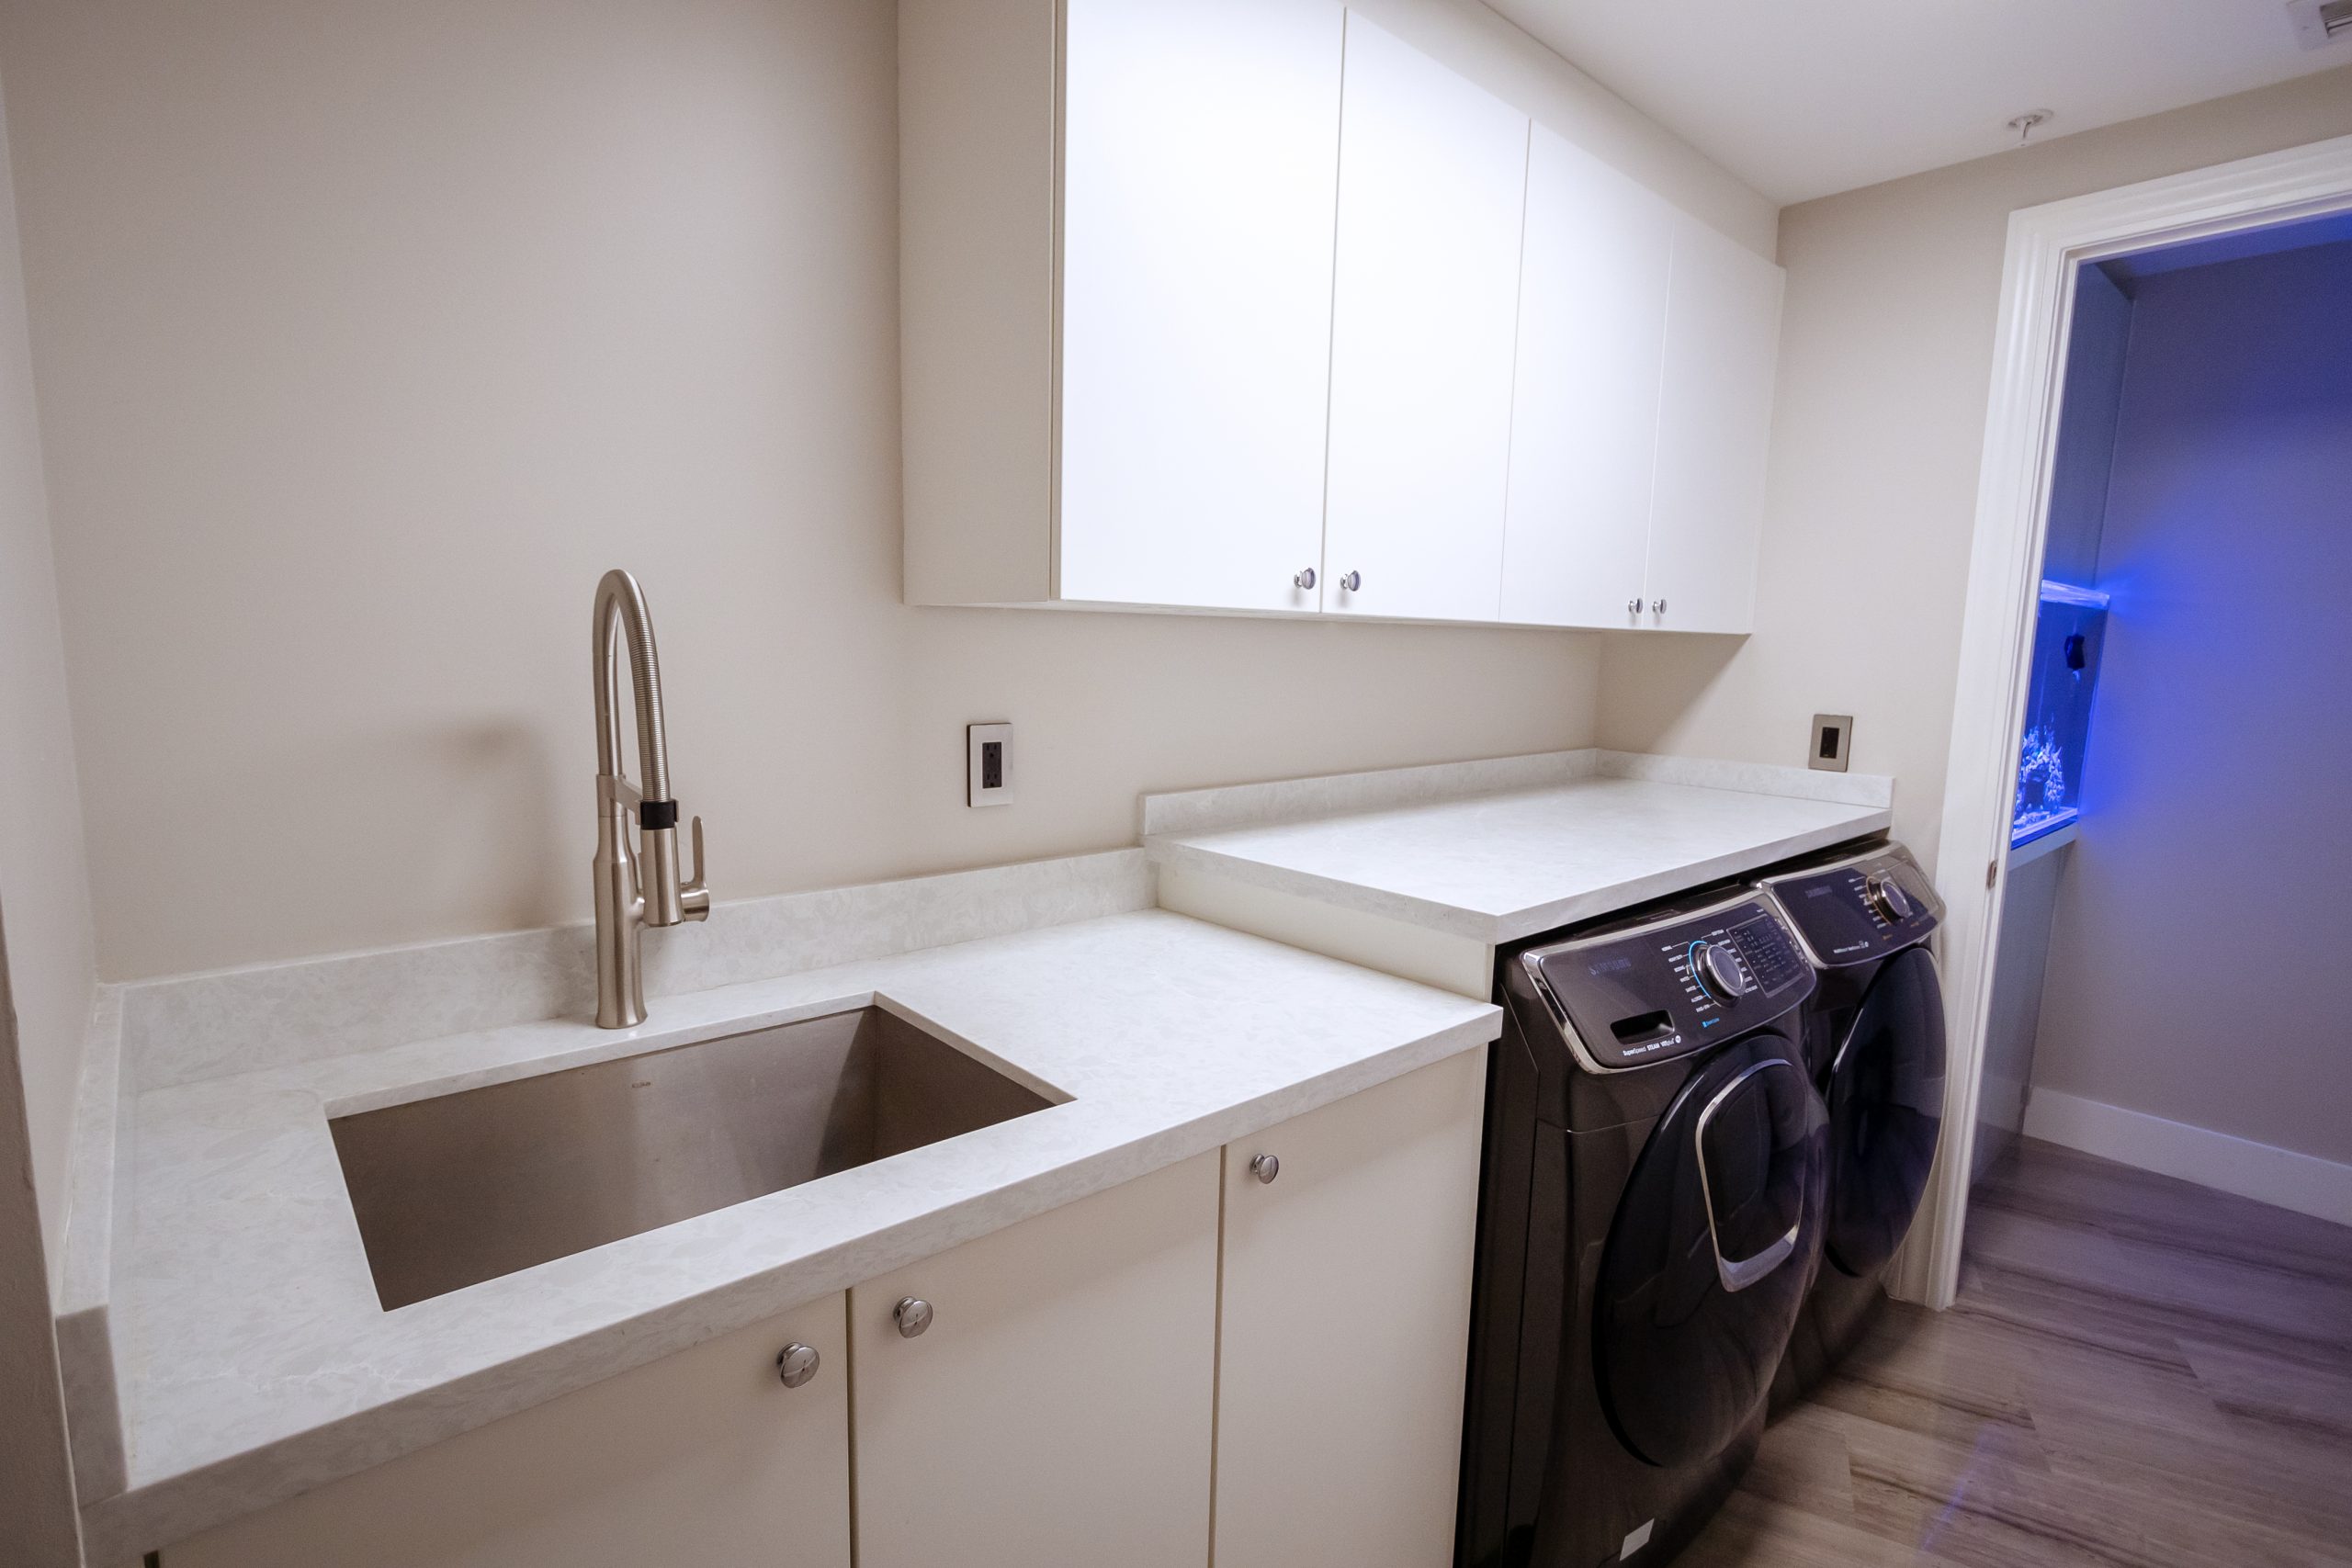 White marble laundry room countertop with washer and dryer, sink